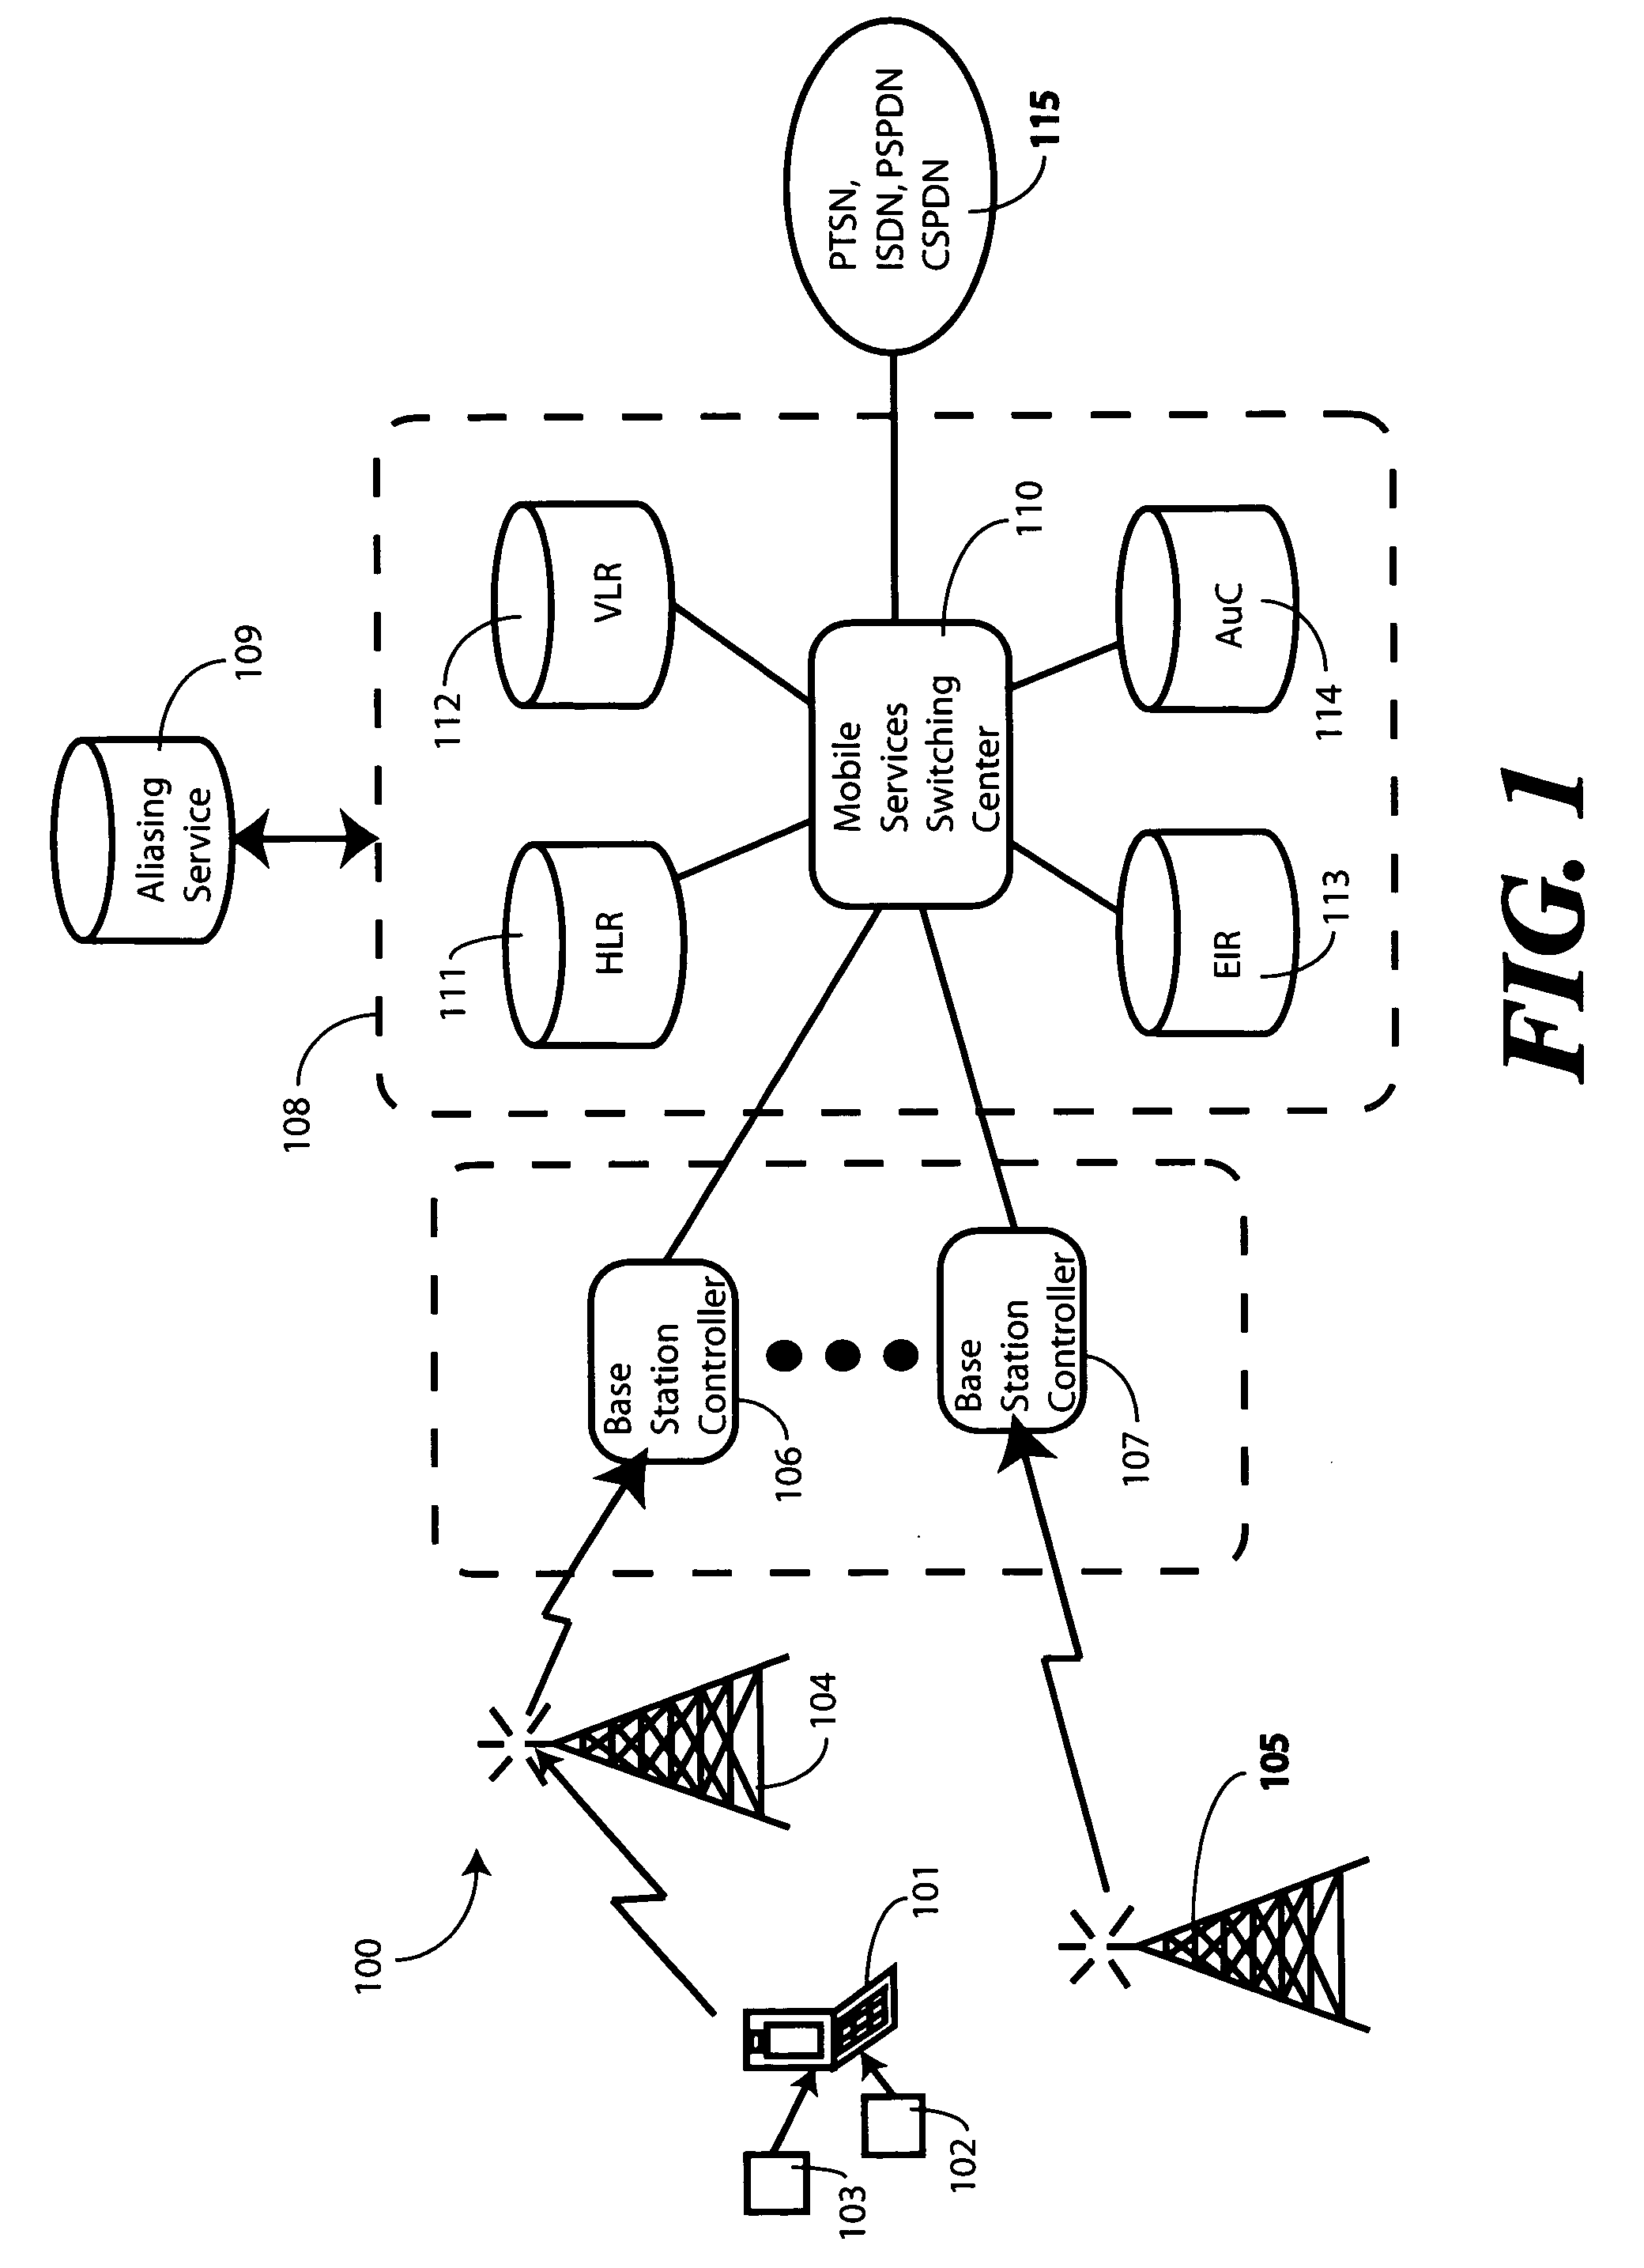 System and method for telephone call information aliasing